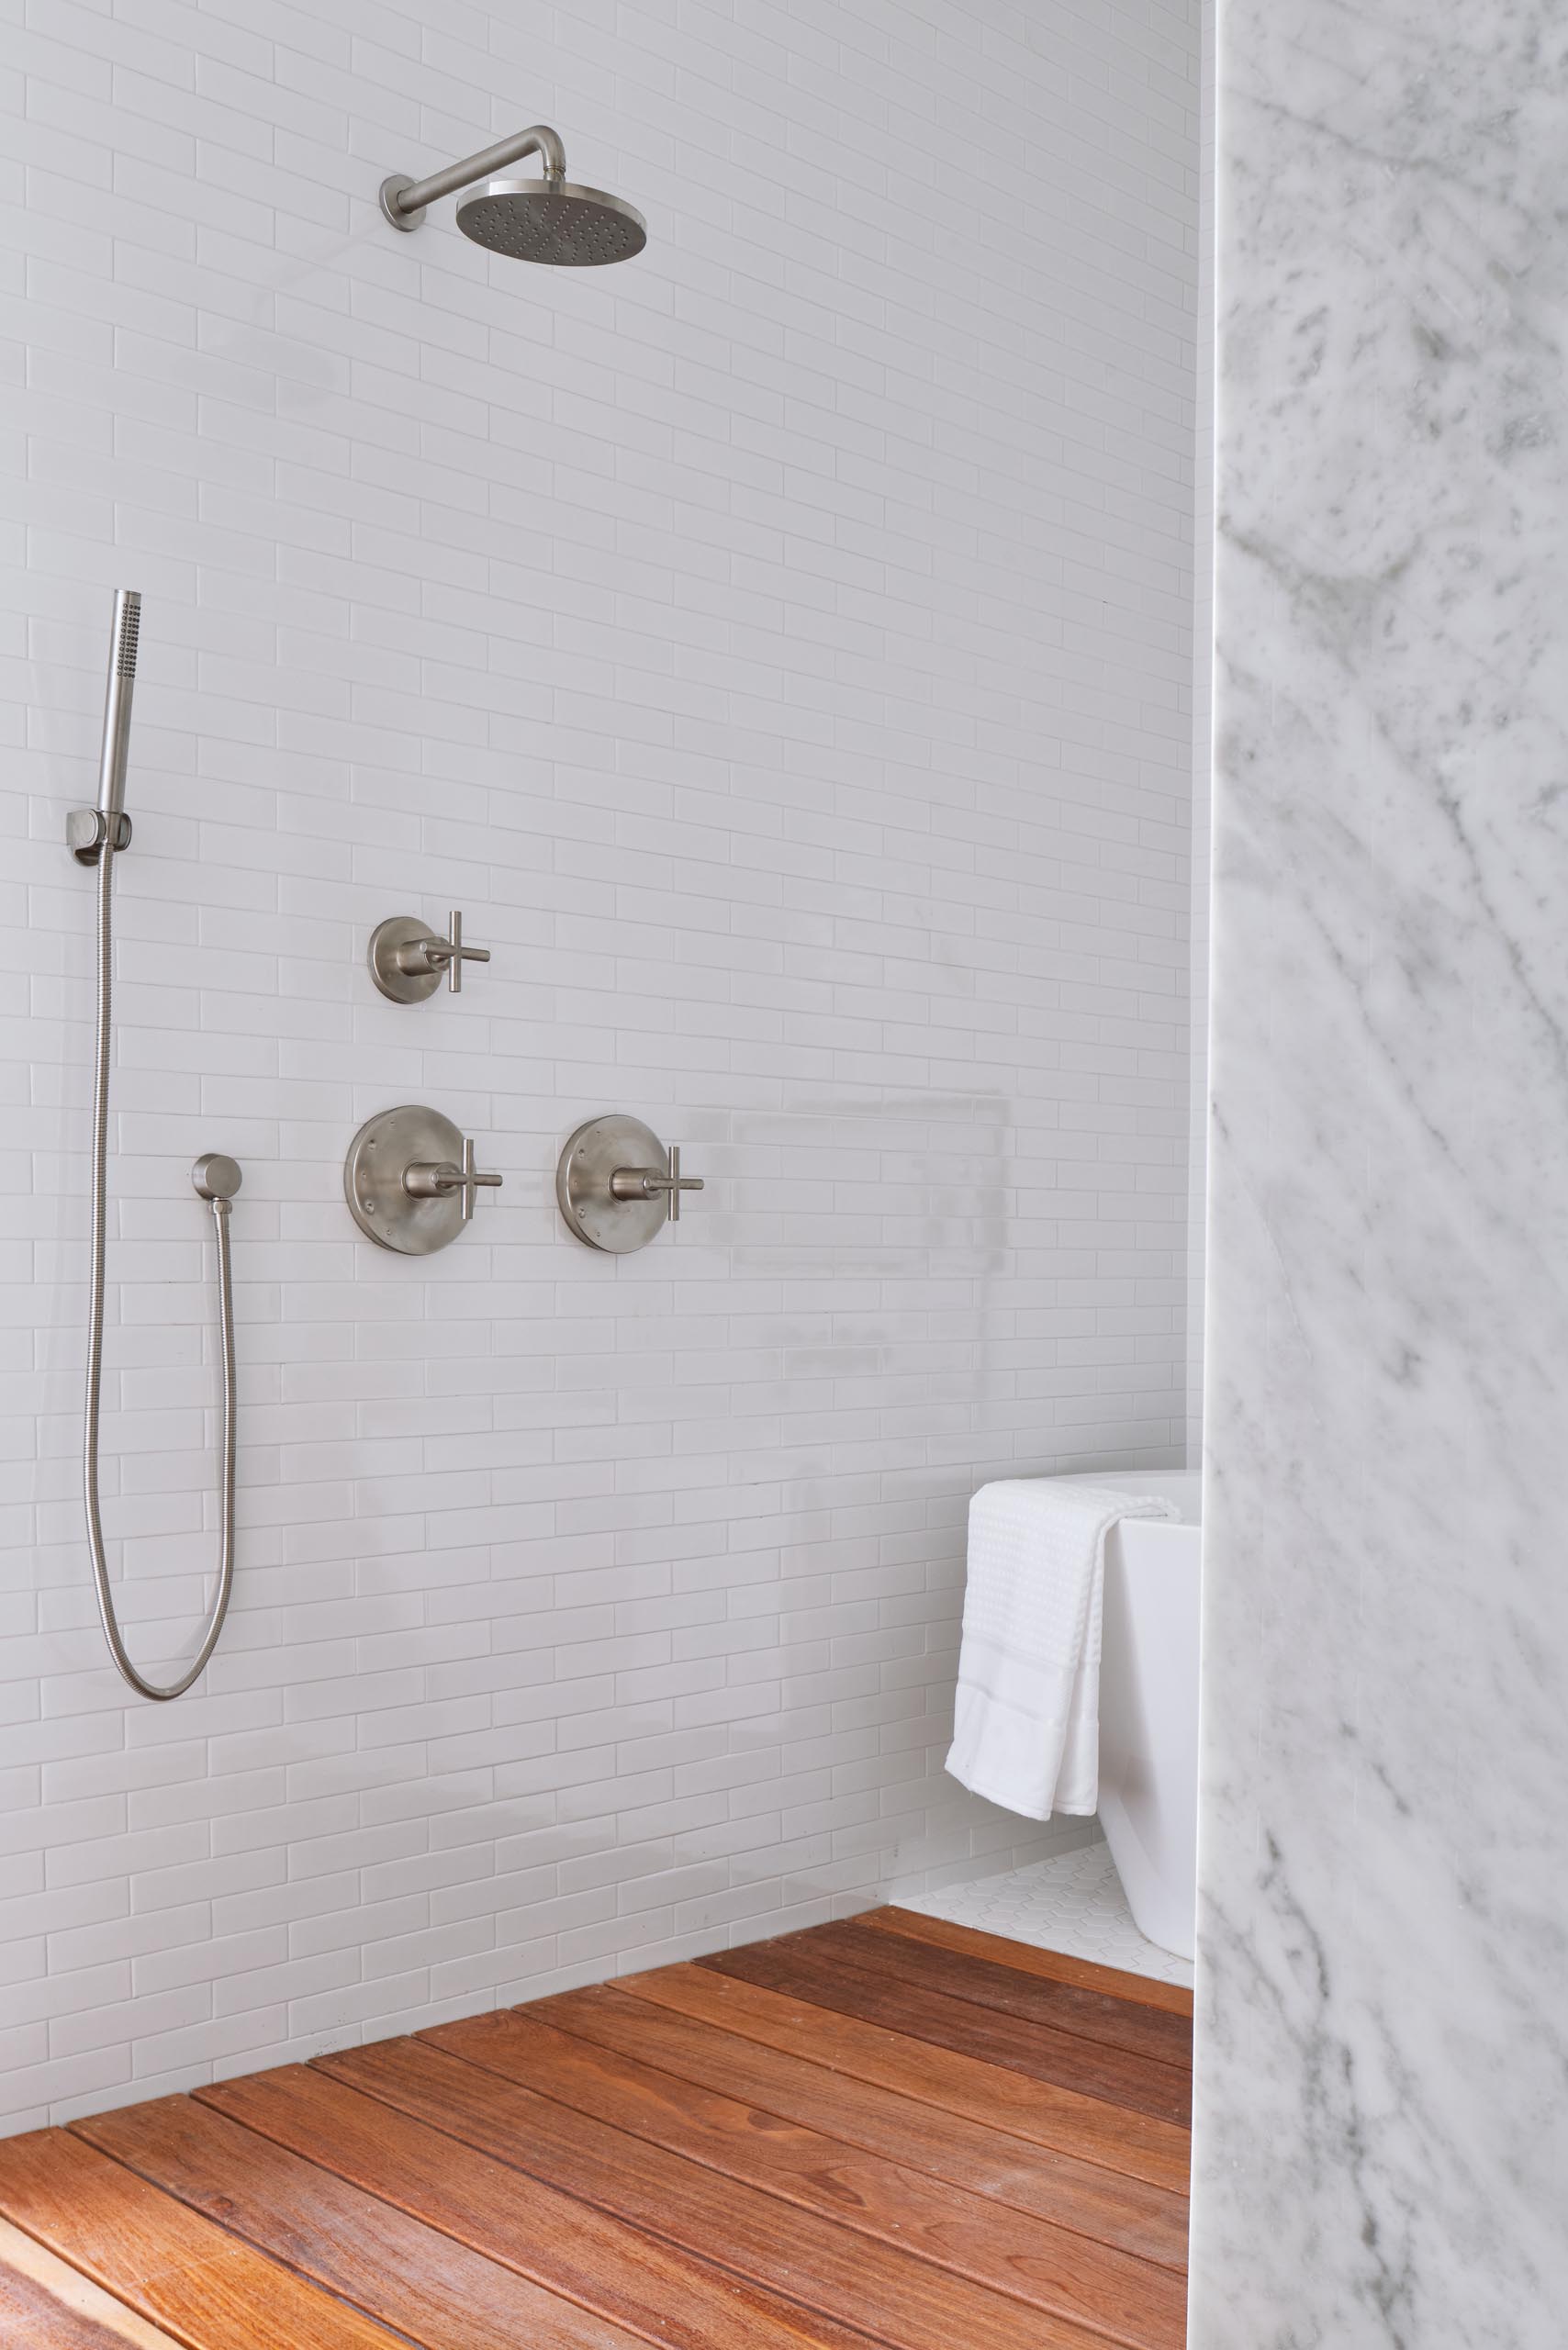 A modern white bathroom with white tiles and a wood shower floor.